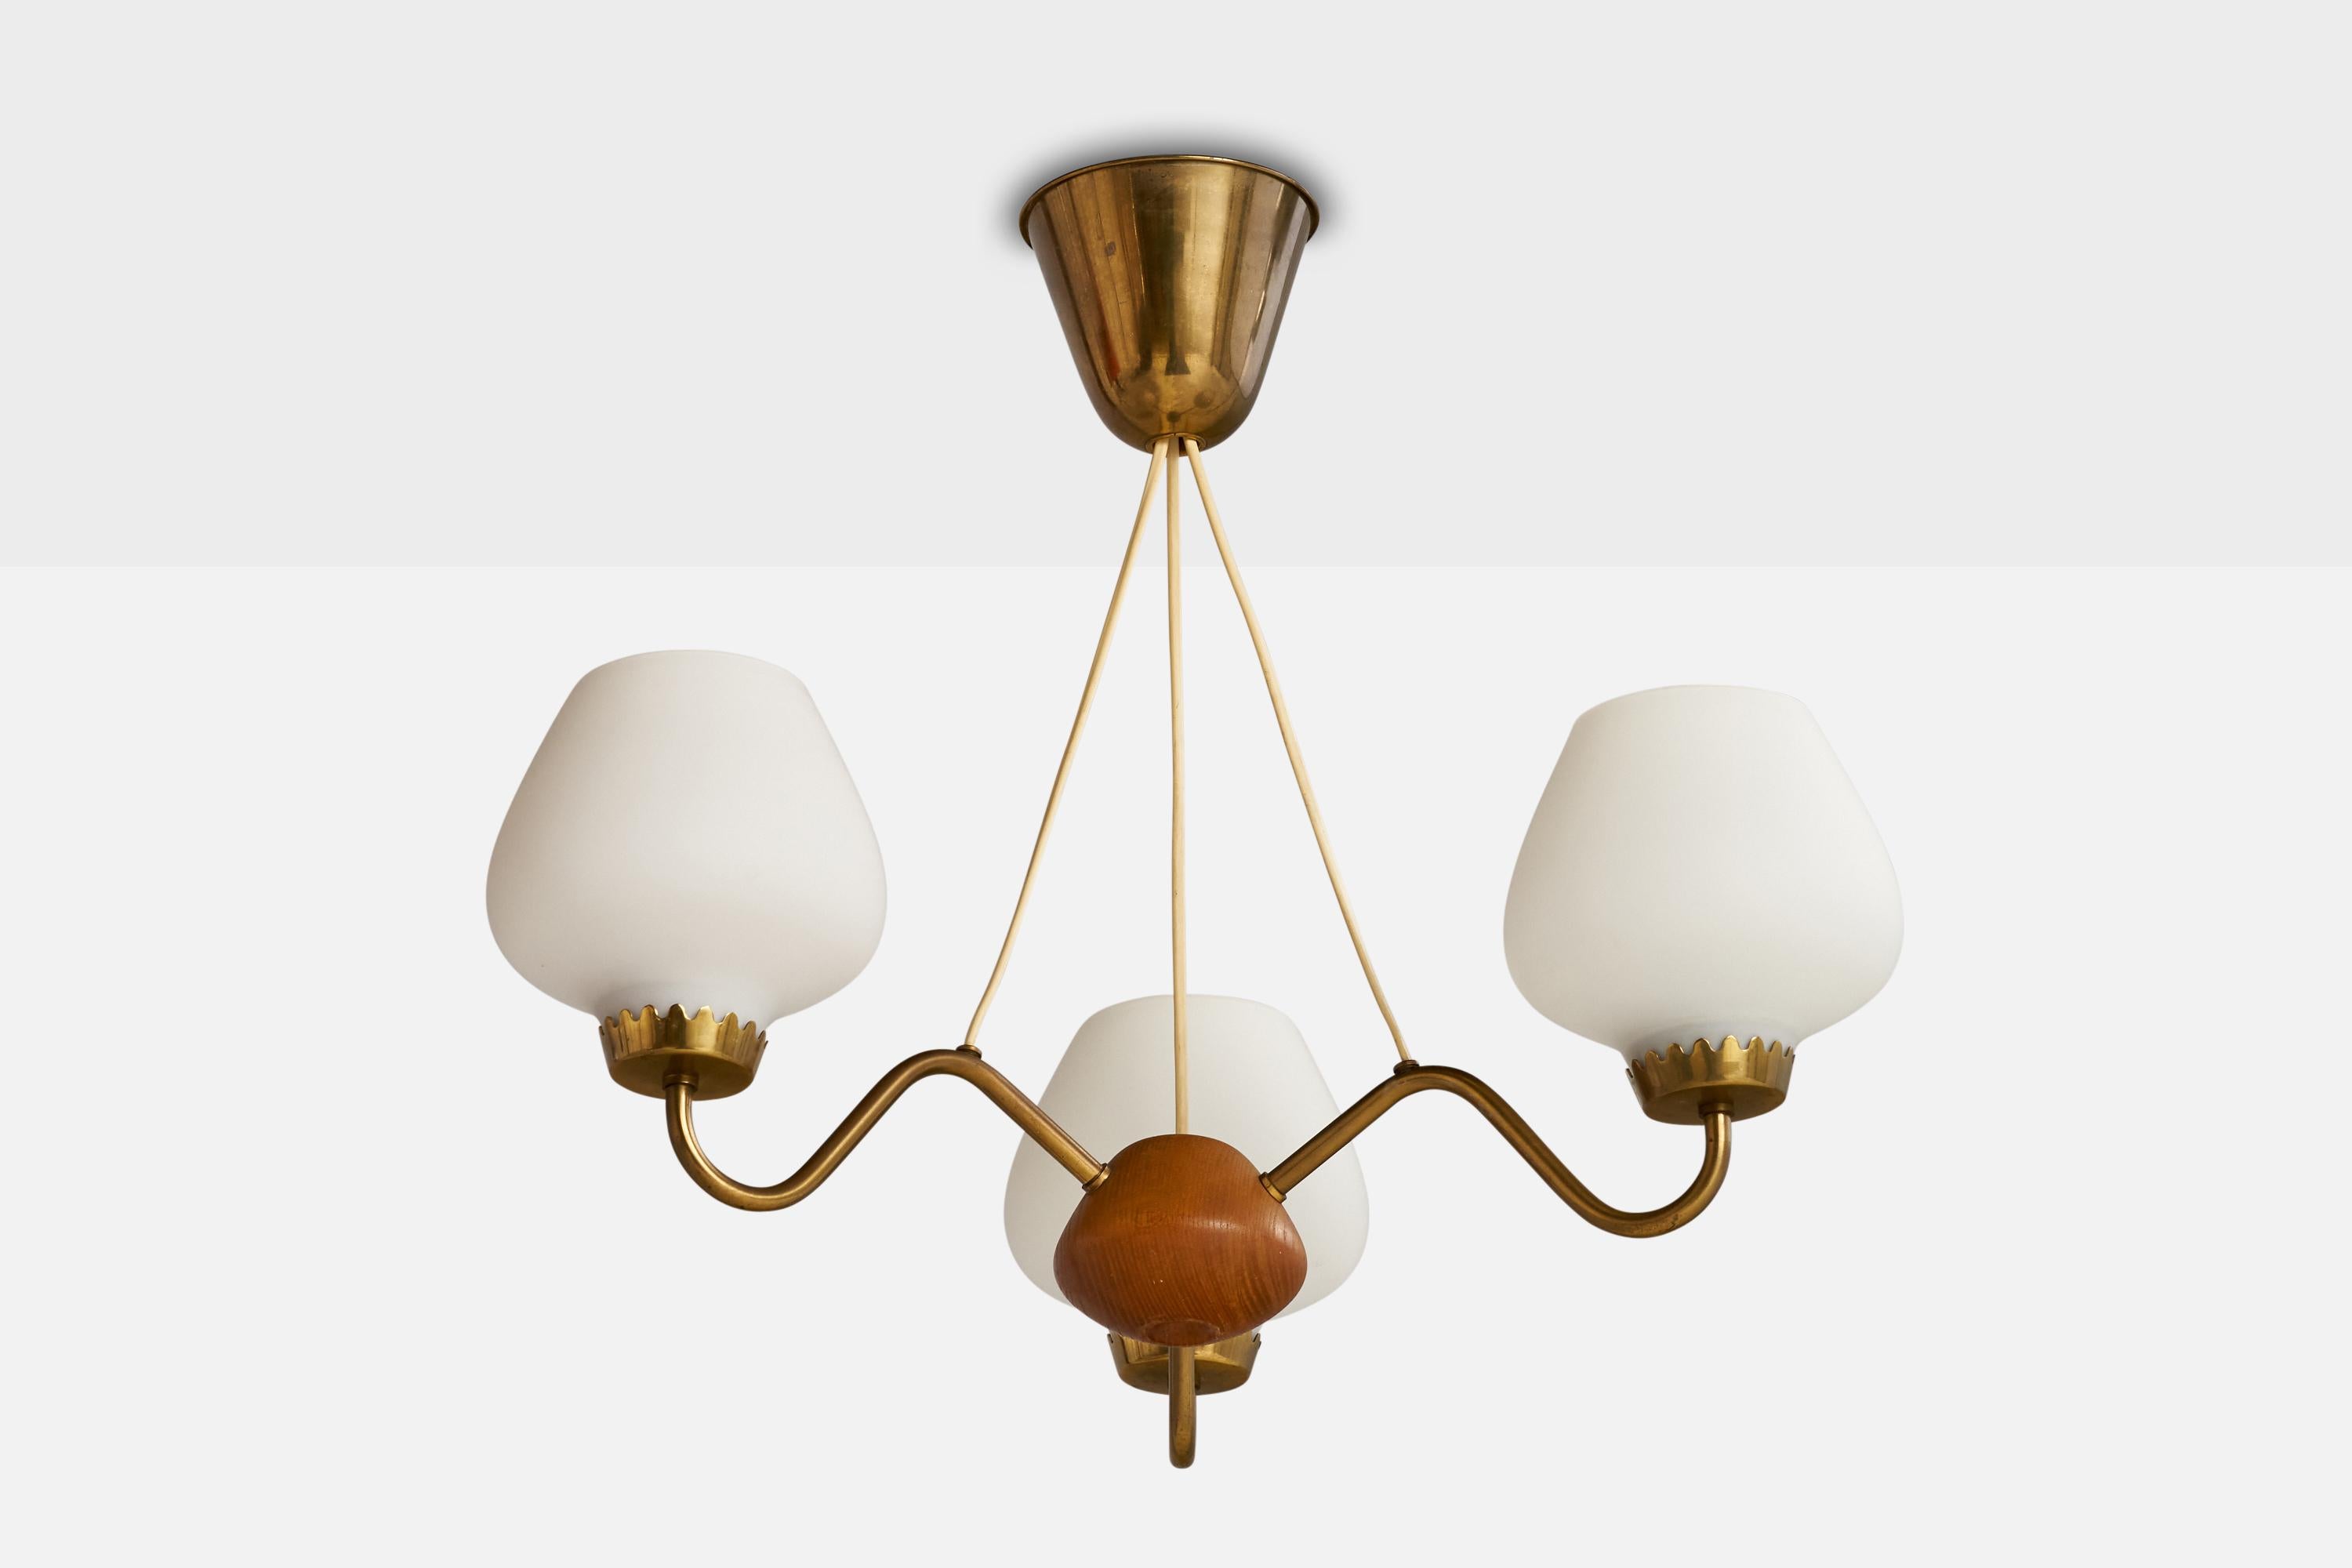 A three-armed brass, oak and opaline glass chandelier designed and produced by ASEA, Sweden, 1940s.

Dimensions of canopy (inches): 3.75”  H x 3.5” Diameter
Socket takes standard E-26 bulbs. 3 sockets.There is no maximum wattage stated on the